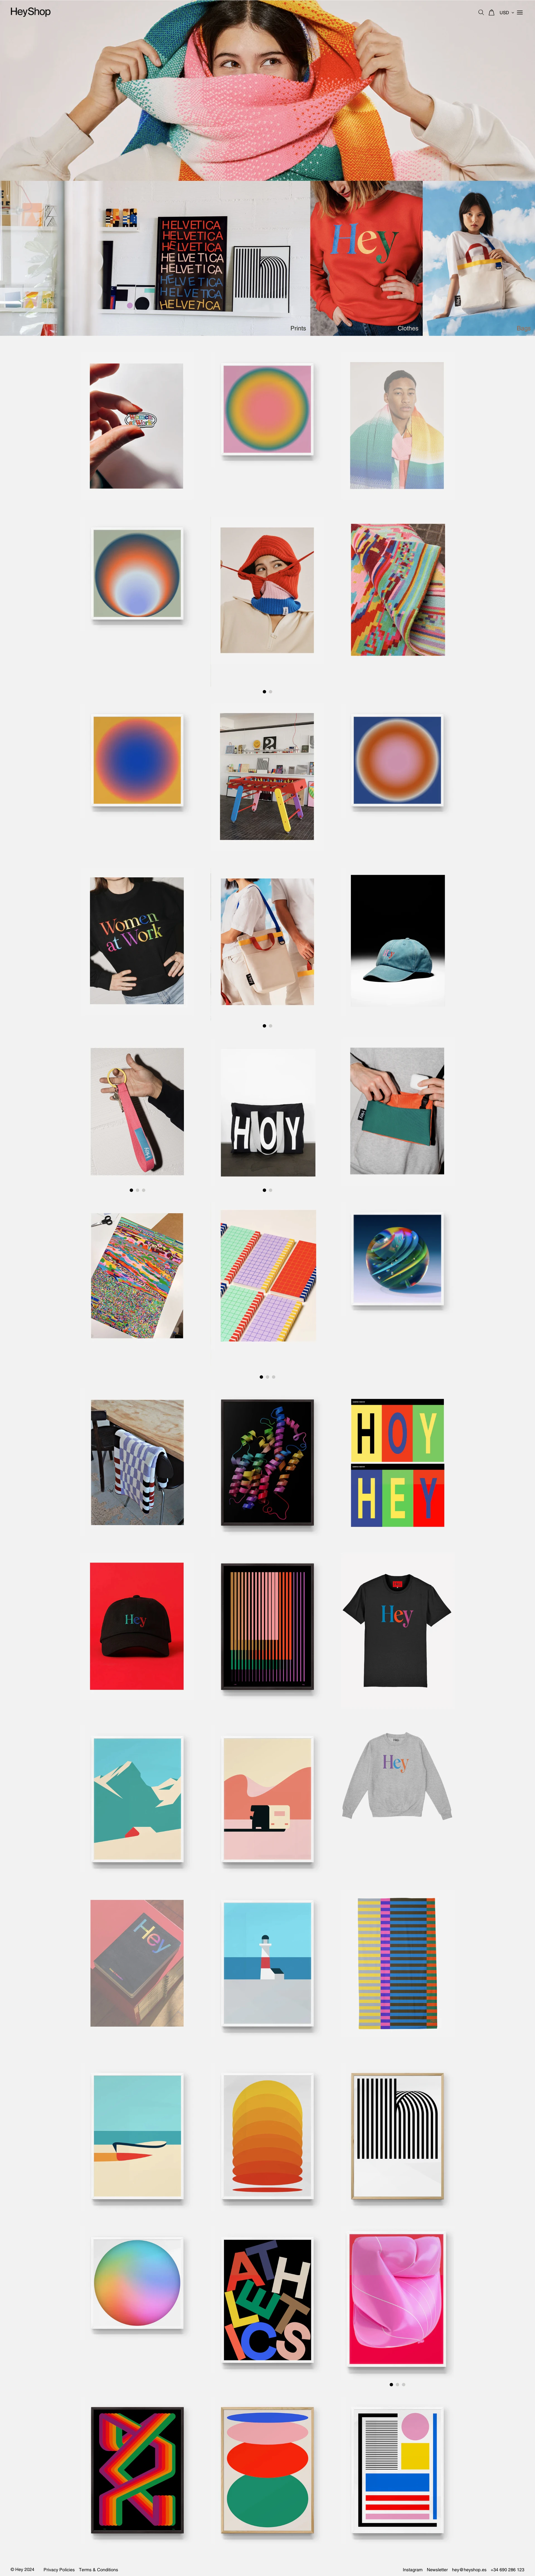 HeyShop Landing Page Example: Welcome to HeyShop, store of Hey creative studio. We produce designer products with a focus on graphic design, made in Spain with a strong commitment to sustainability.